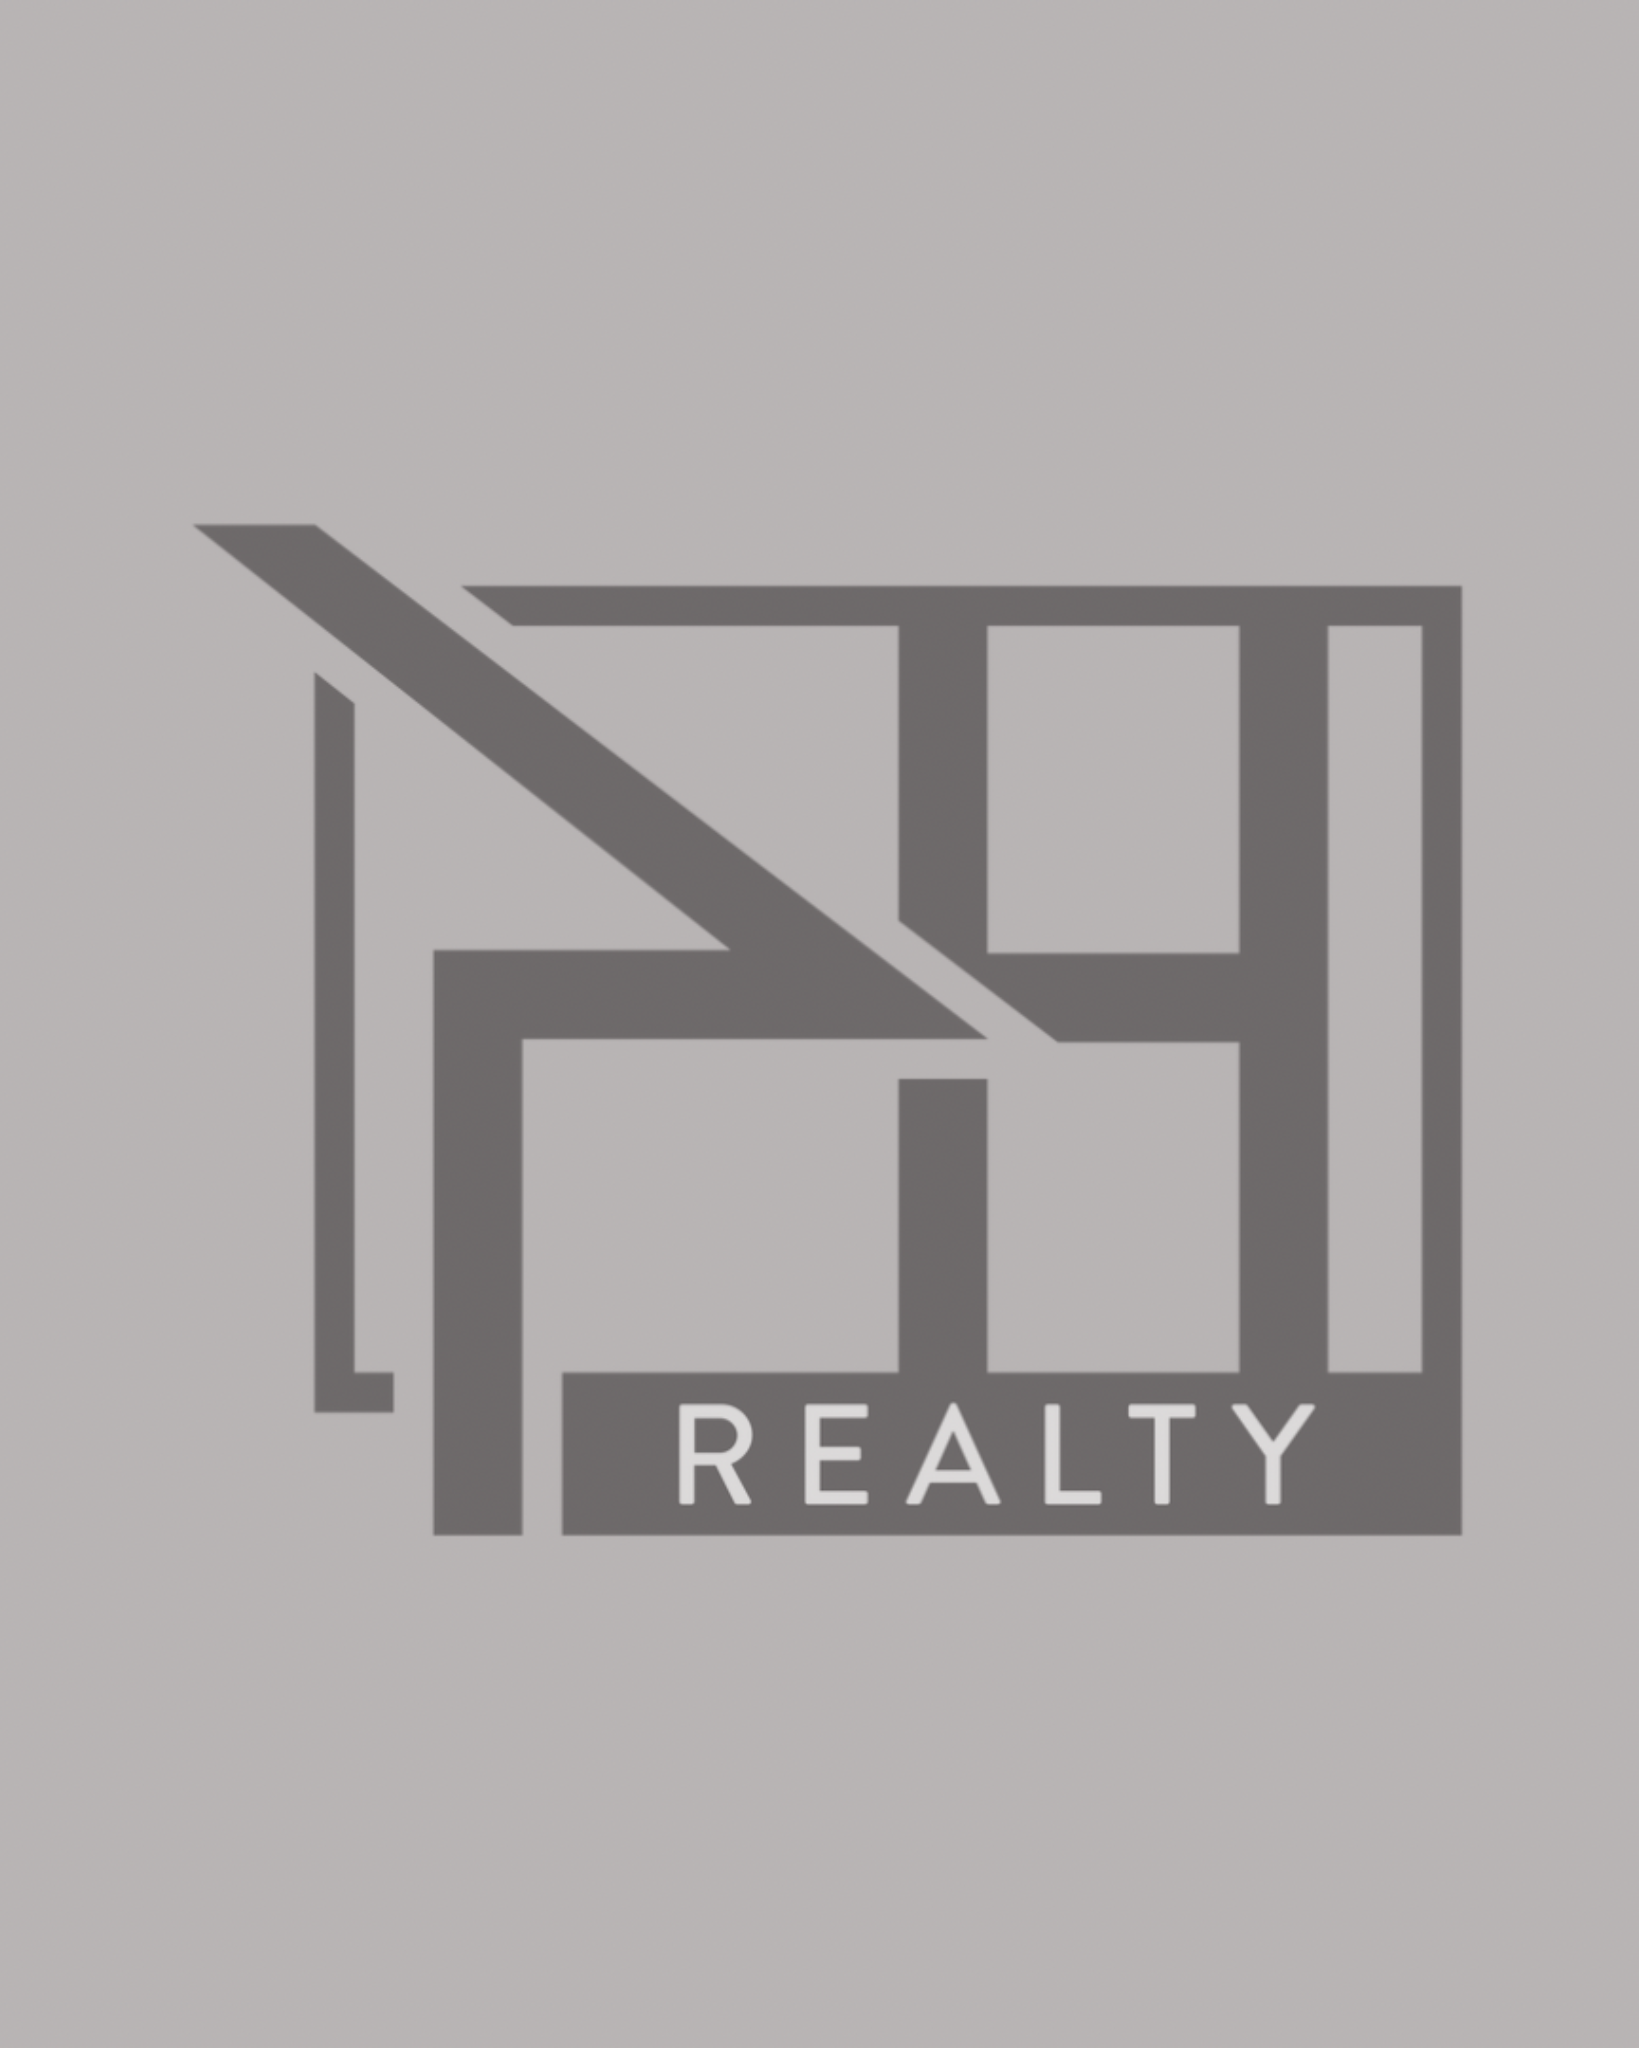 Leo Morales, Administrator at PH Realty, a real estate brokerage and team, specialized in topnotch marketing and home staging